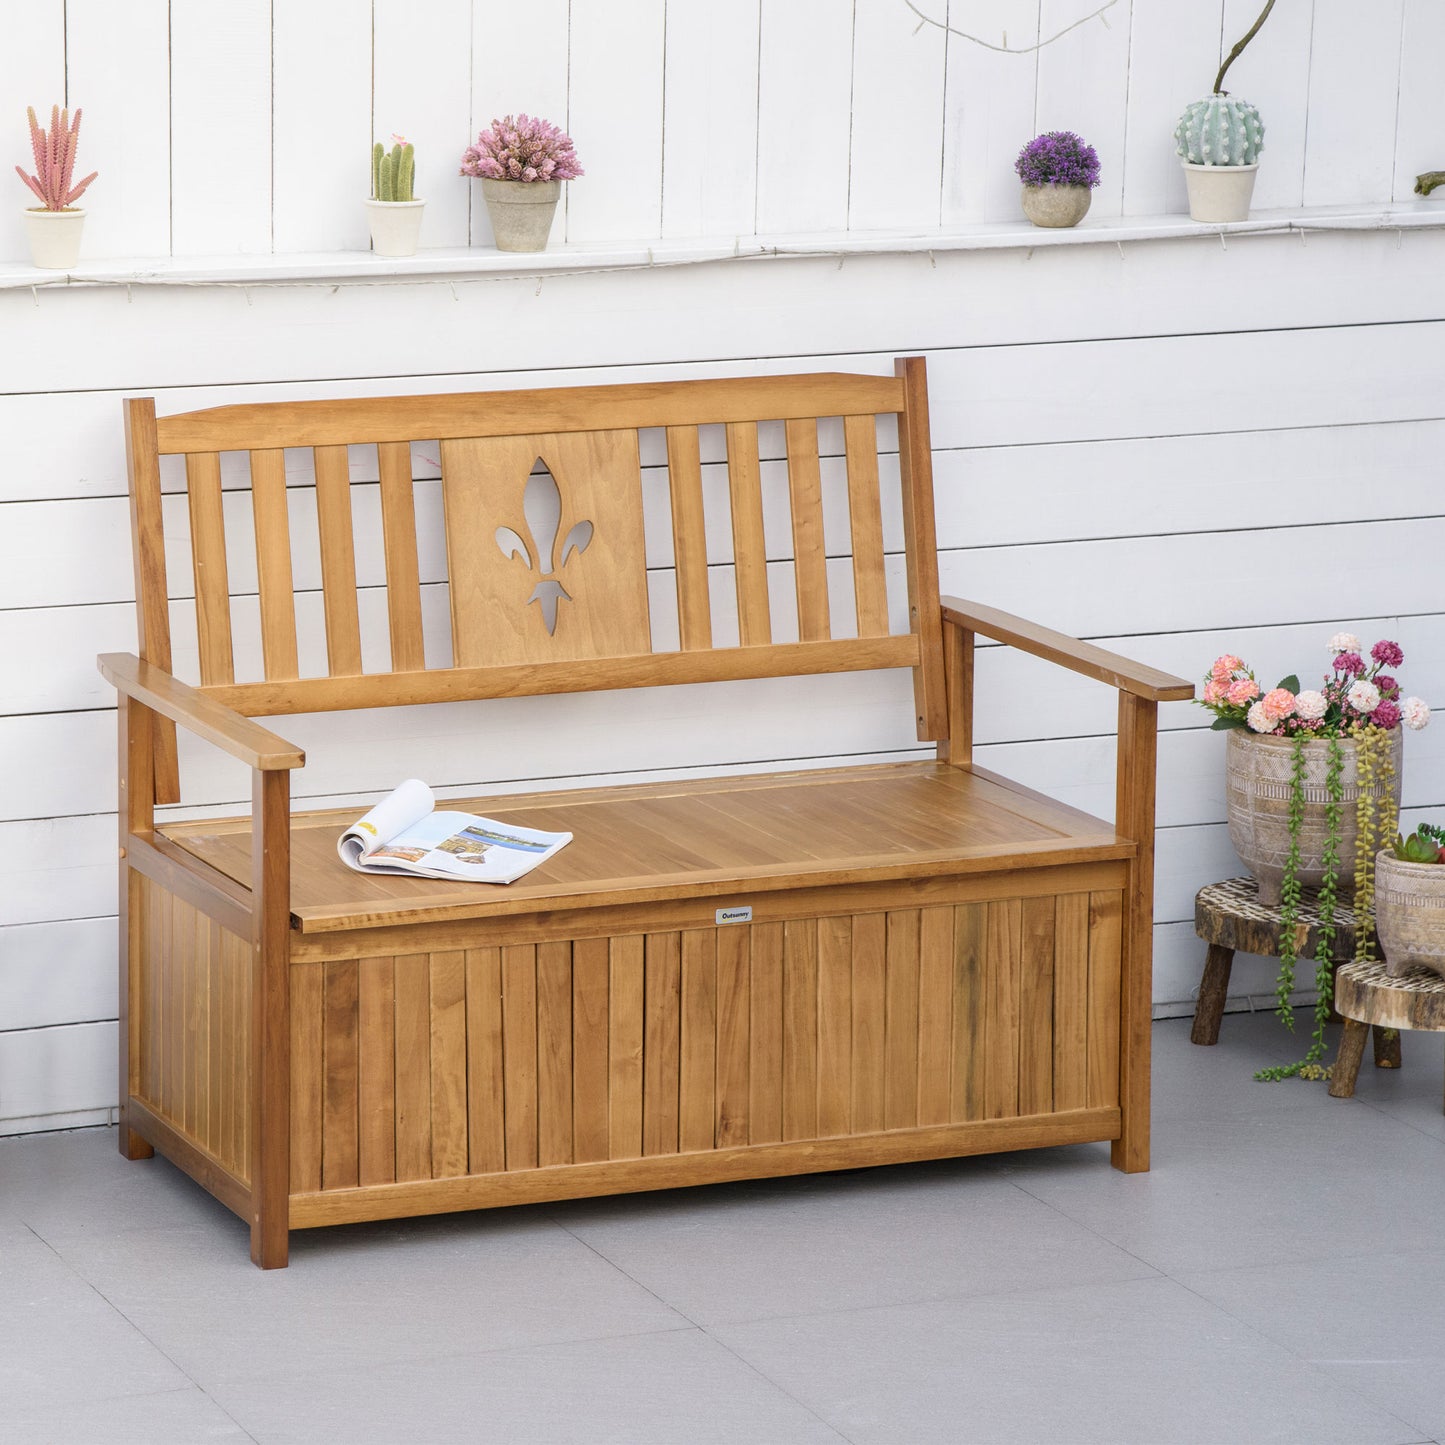 Outsunny 2 Seater Wood Garden Storage Bench